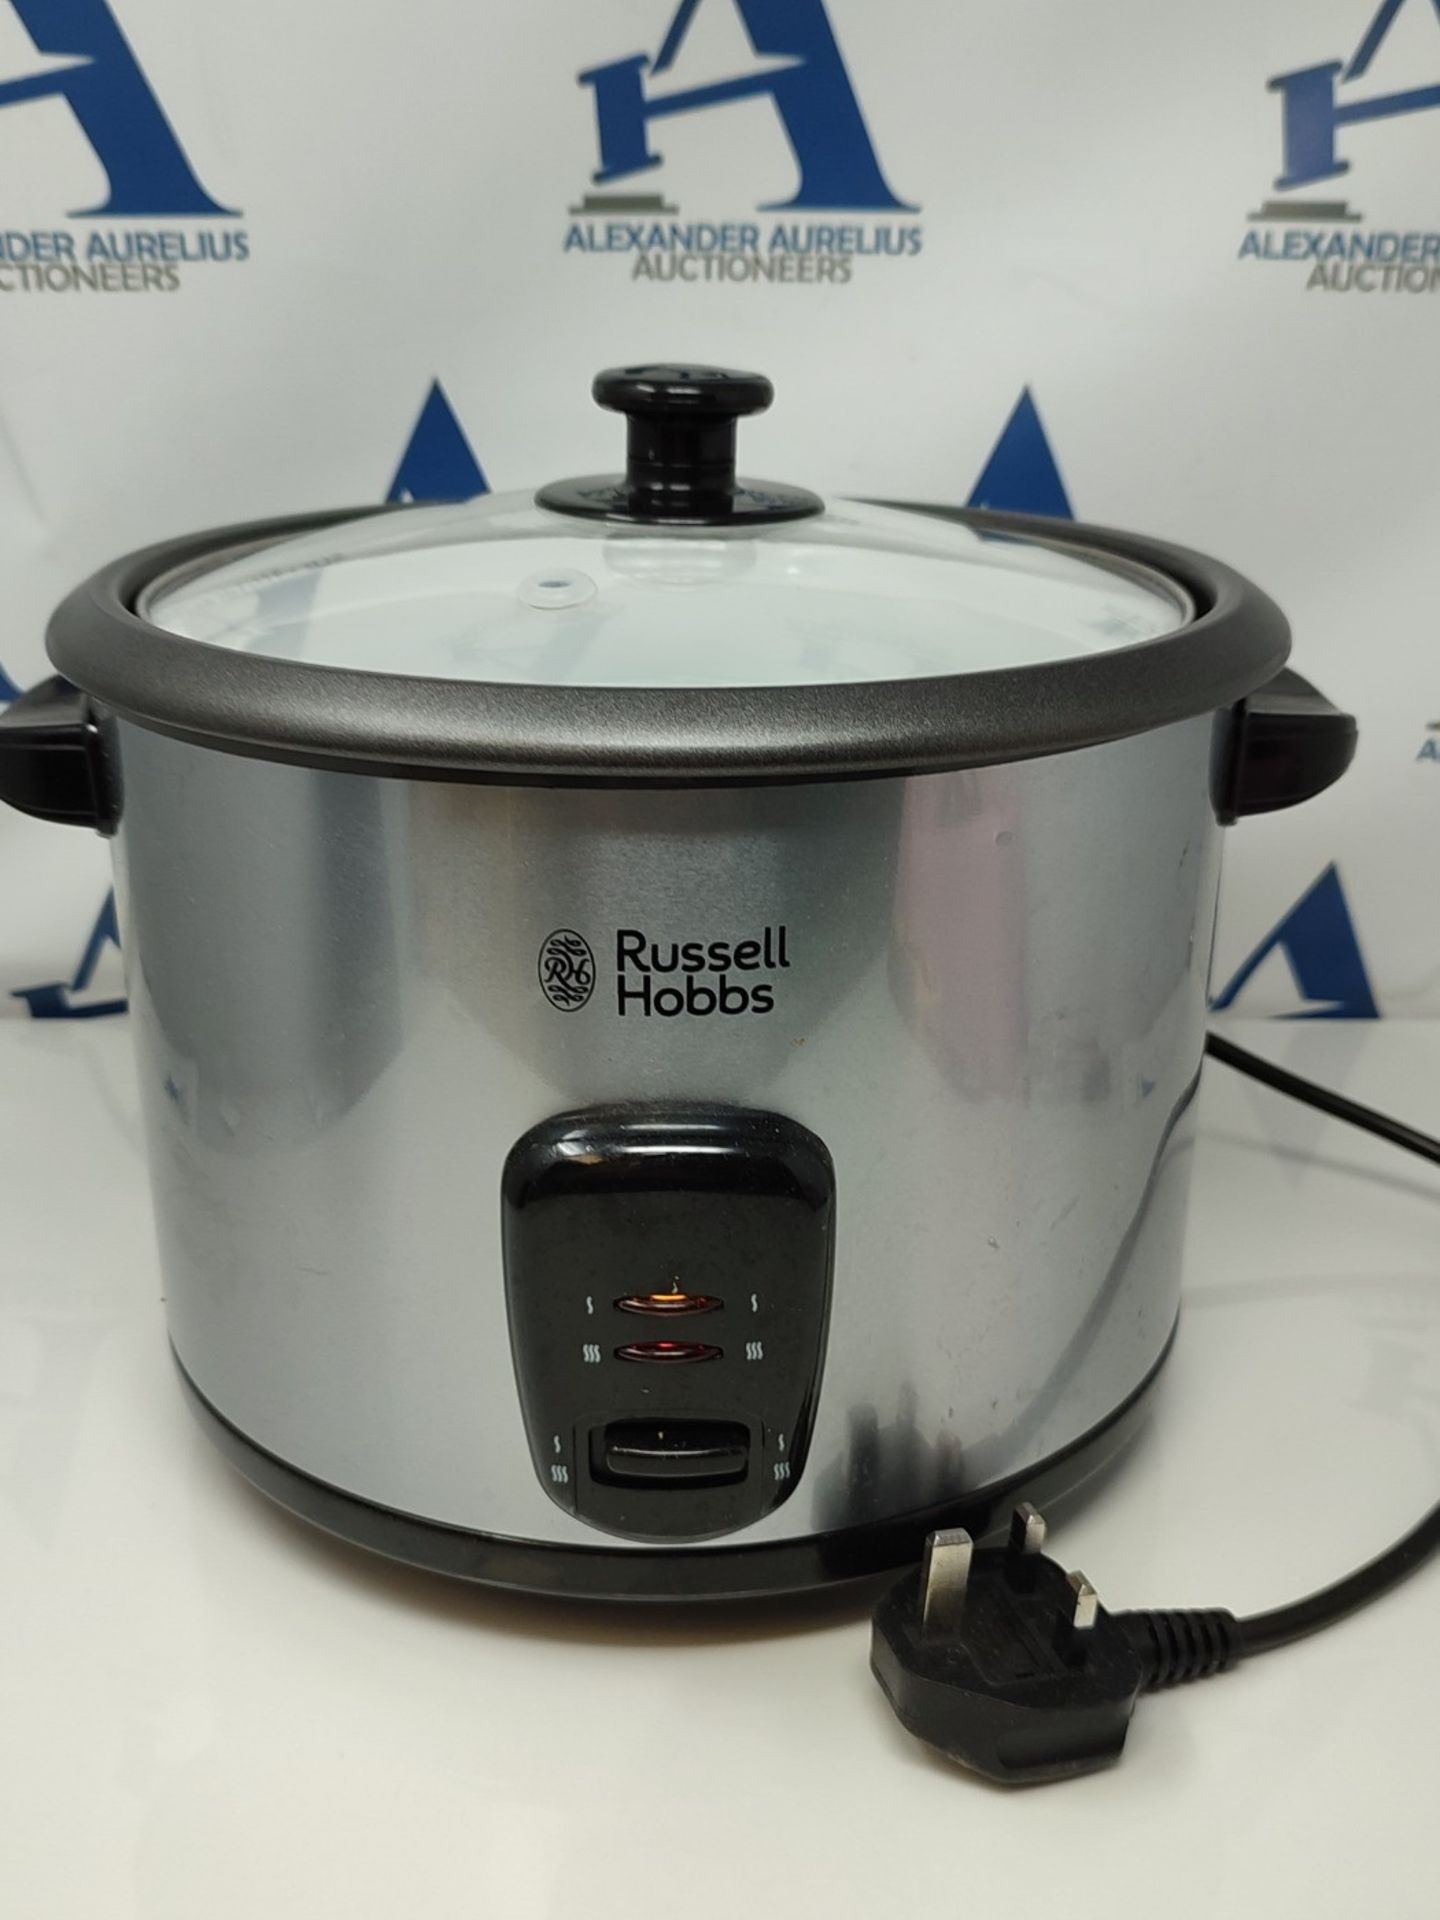 Russell Hobbs 19750 Rice Cooker and Steamer, 1.8L, Silver - Image 3 of 3